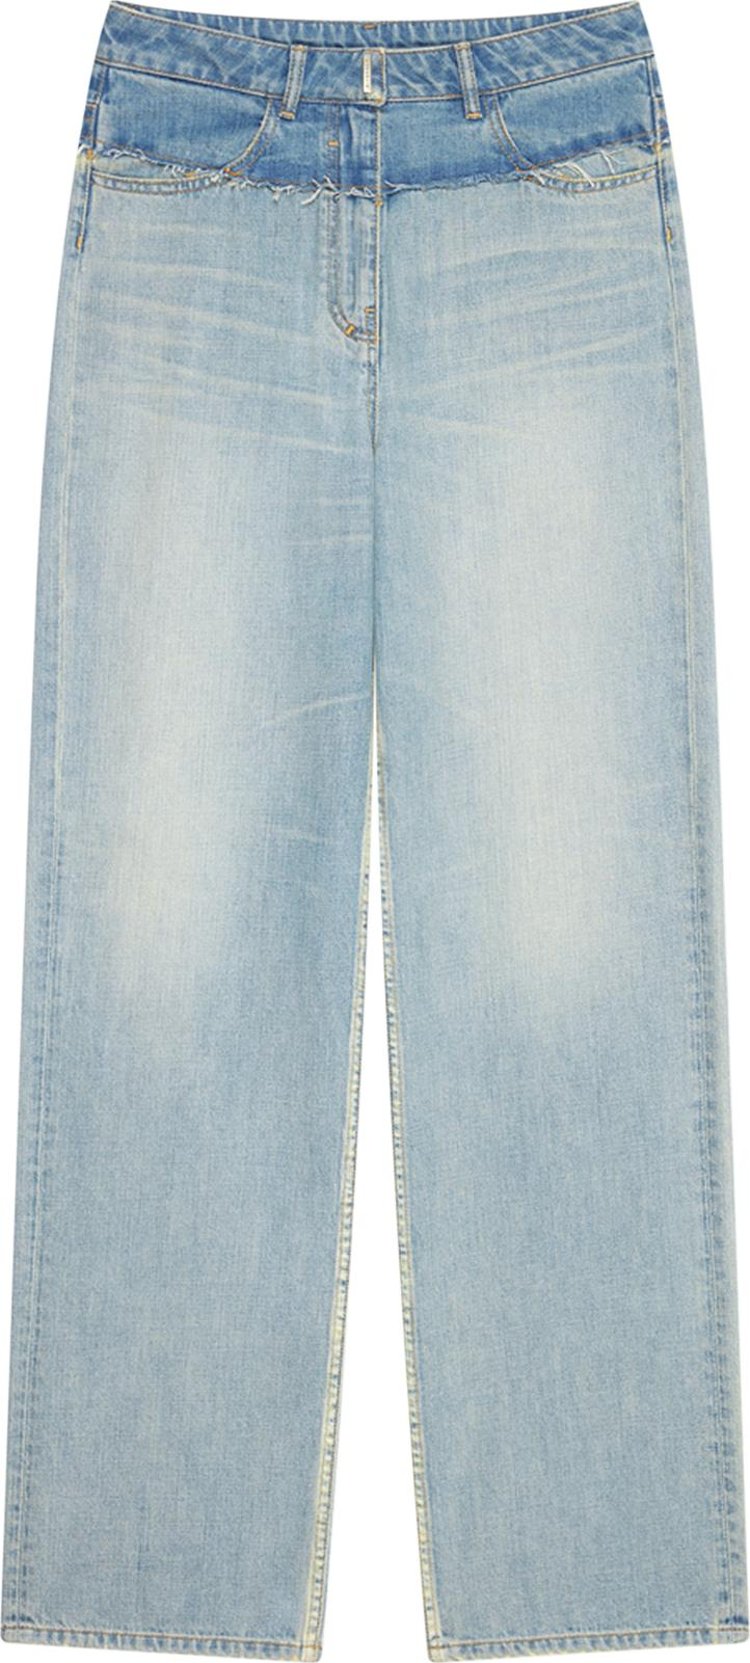 Givenchy Oversized Mixed Denim Jeans 'Pale Blue'